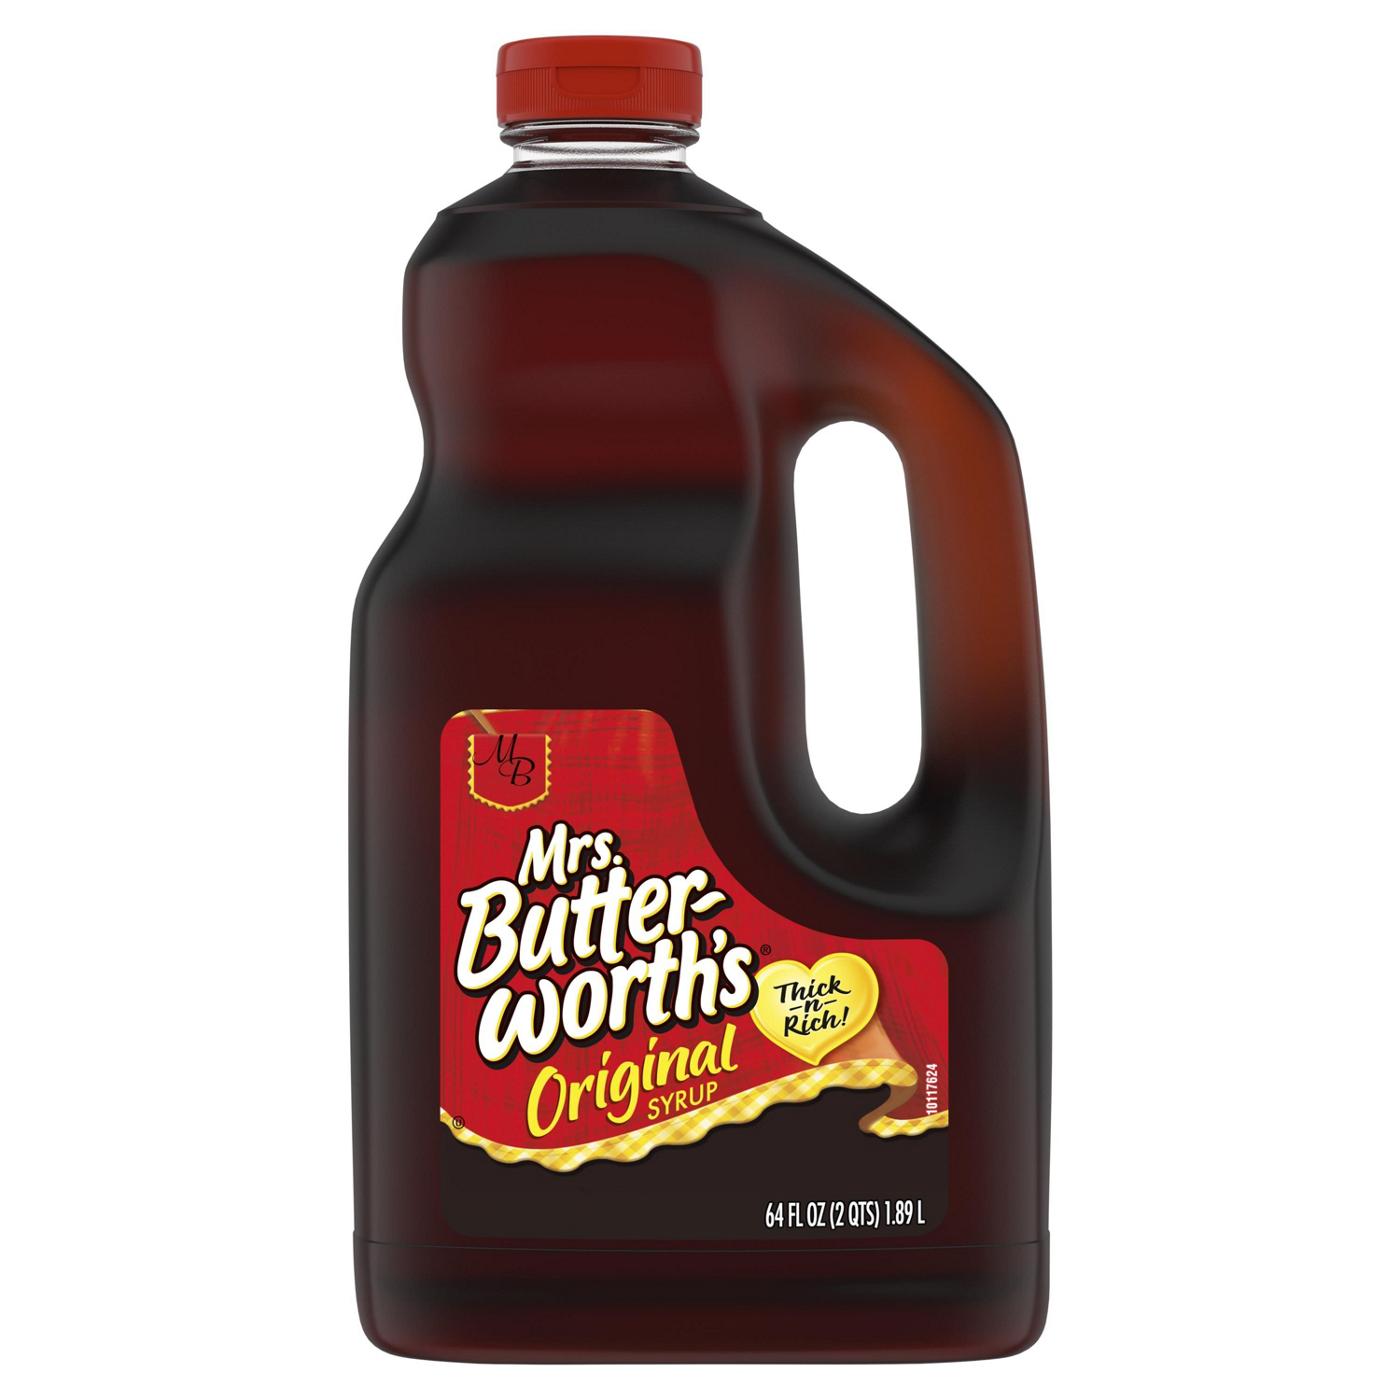 Mrs. Butterworth's Original Syrup; image 1 of 2